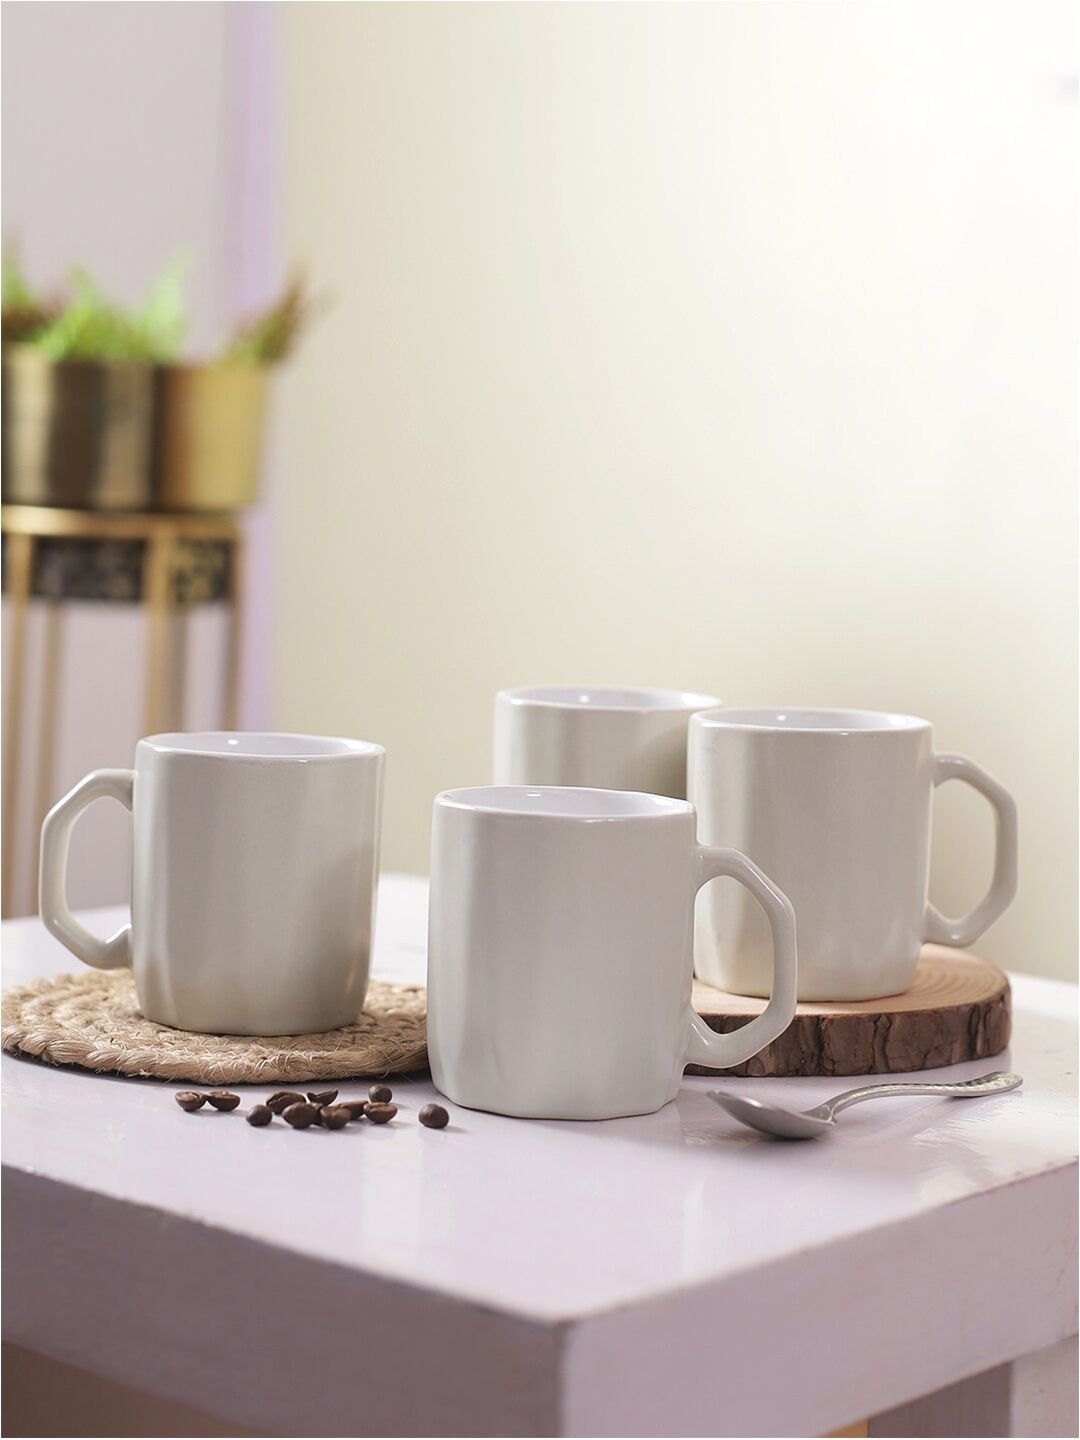 Aapno Rajasthan White Solid Ceramic Glossy Cups Set of Cups Price in India